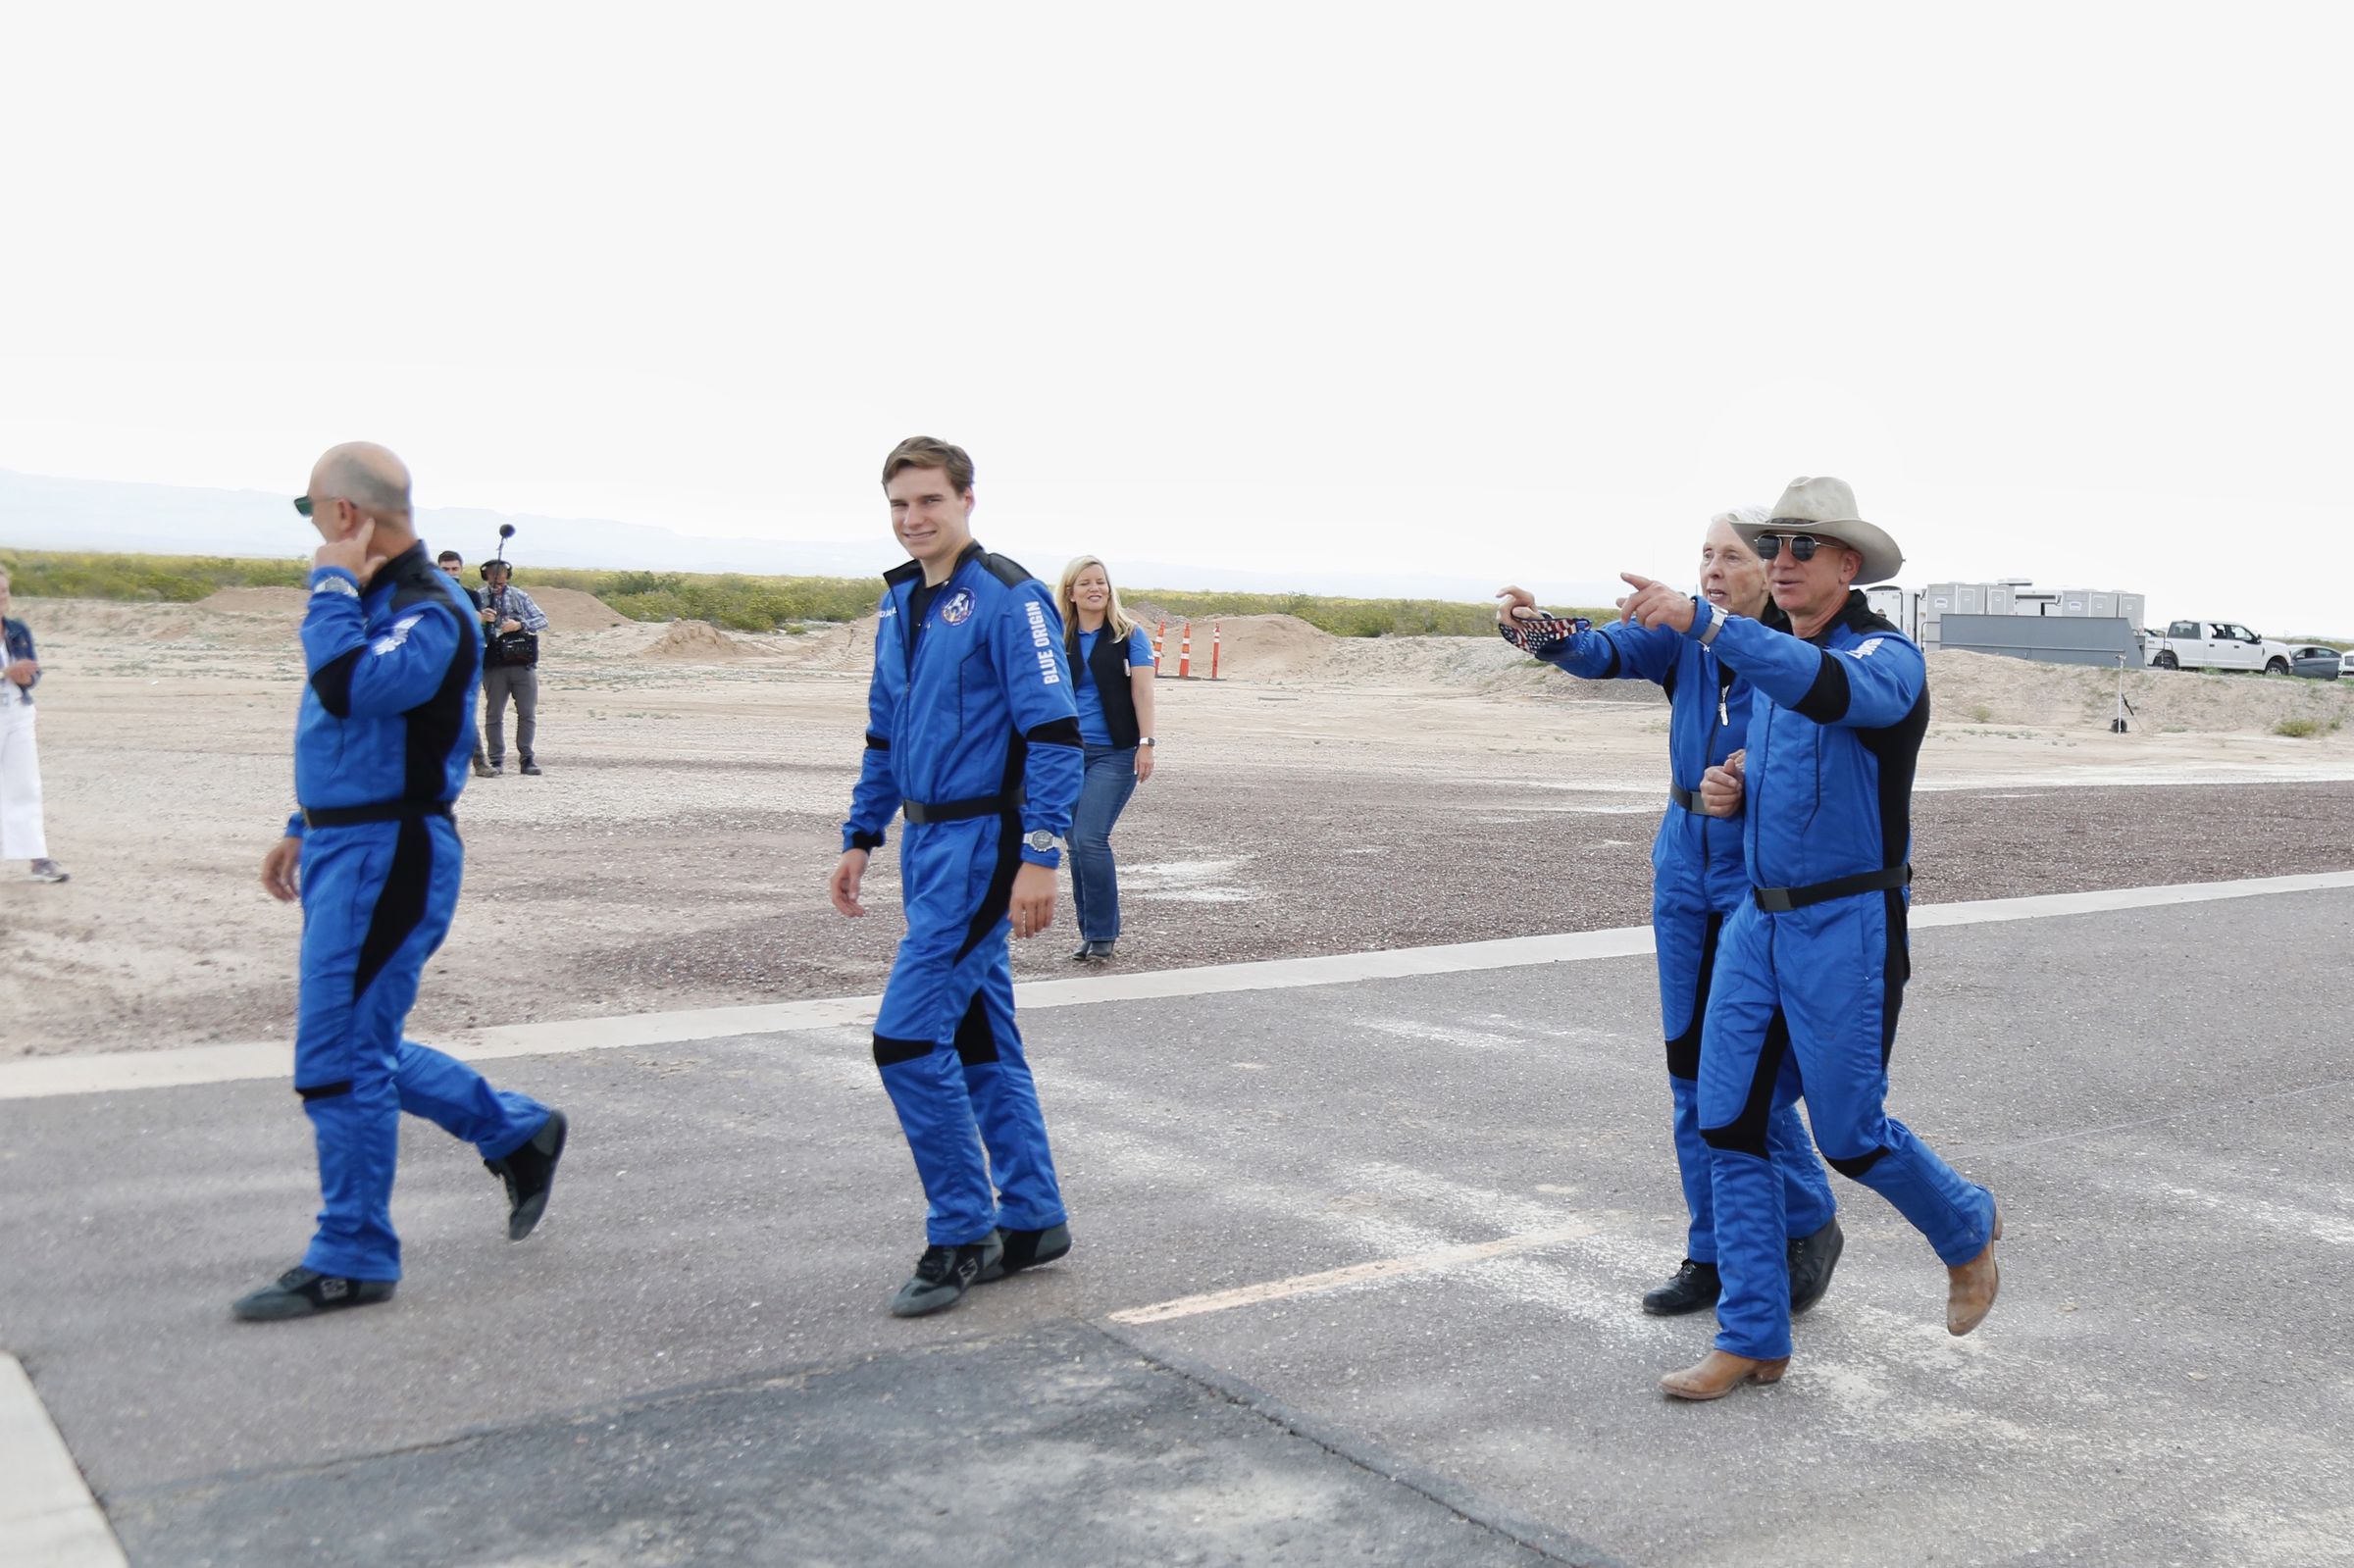 (Left to right) Mark Bezos, Oliver Daemen, Wally Funk and Jeff Bezos walk toward New Shepard’s landing pad for a photo opp hours after returning from a quick trip to space.